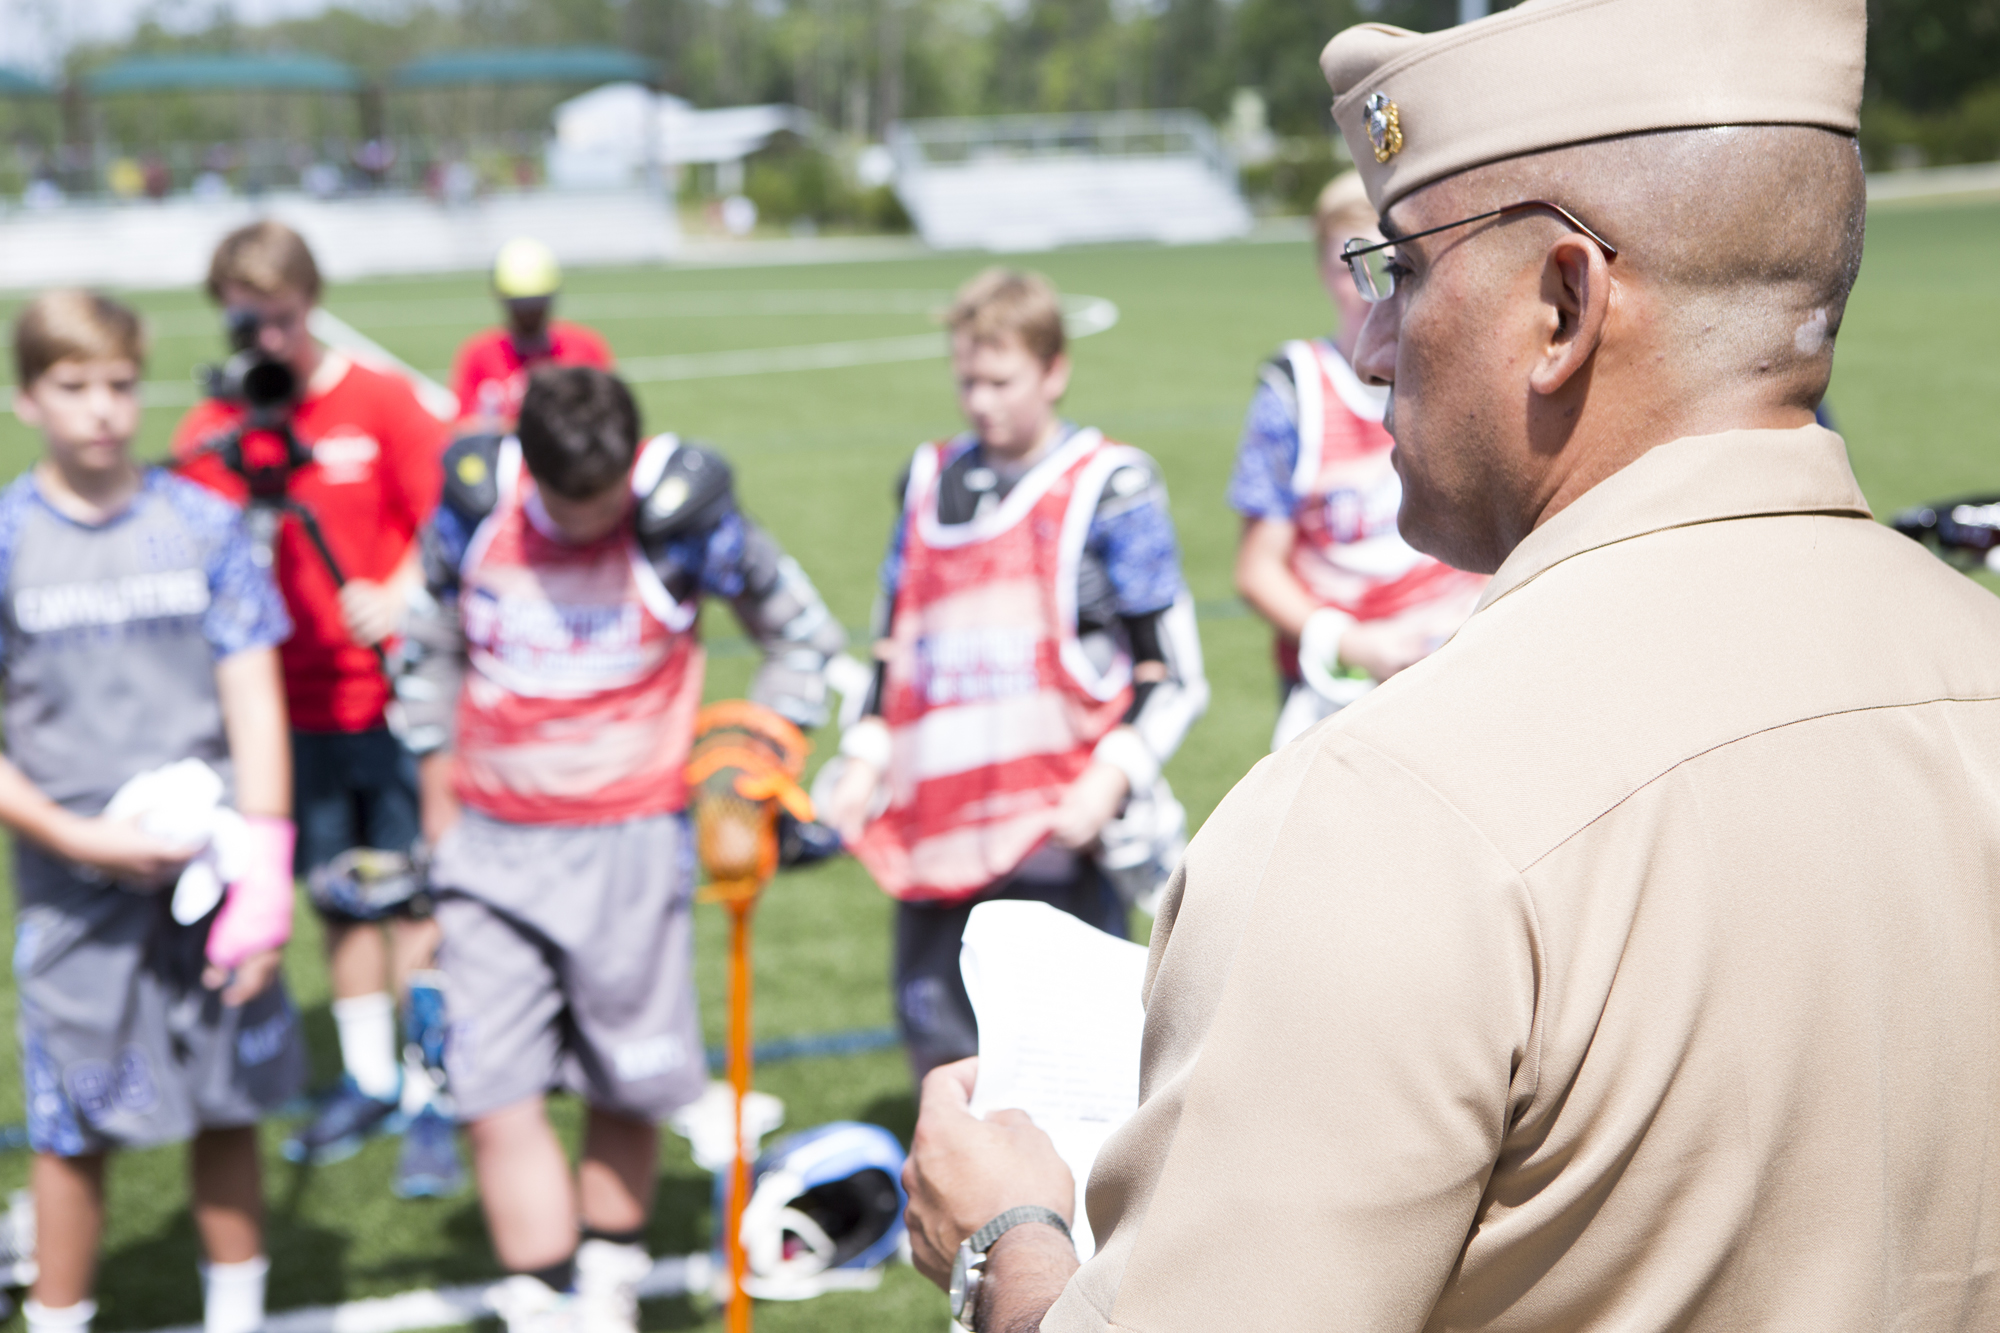 A Sizzlin’ Shootout for Soldiers Texas Surpasses $25,000+ for Veteran Charities!